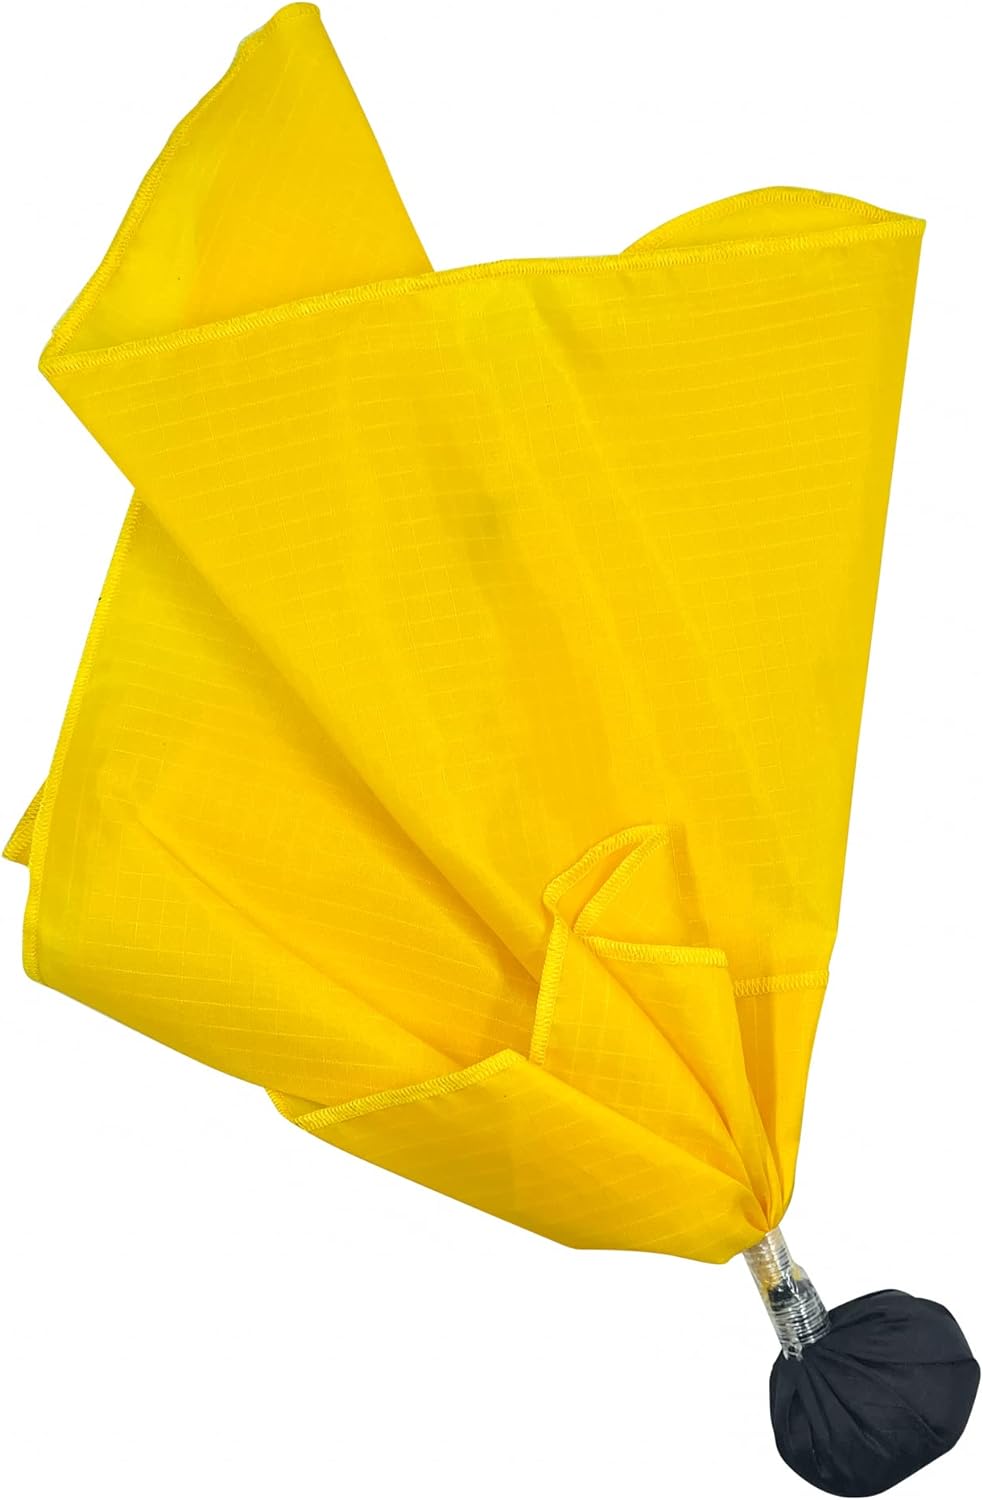 Penalty Flag For Football Lacrosse and Officials 